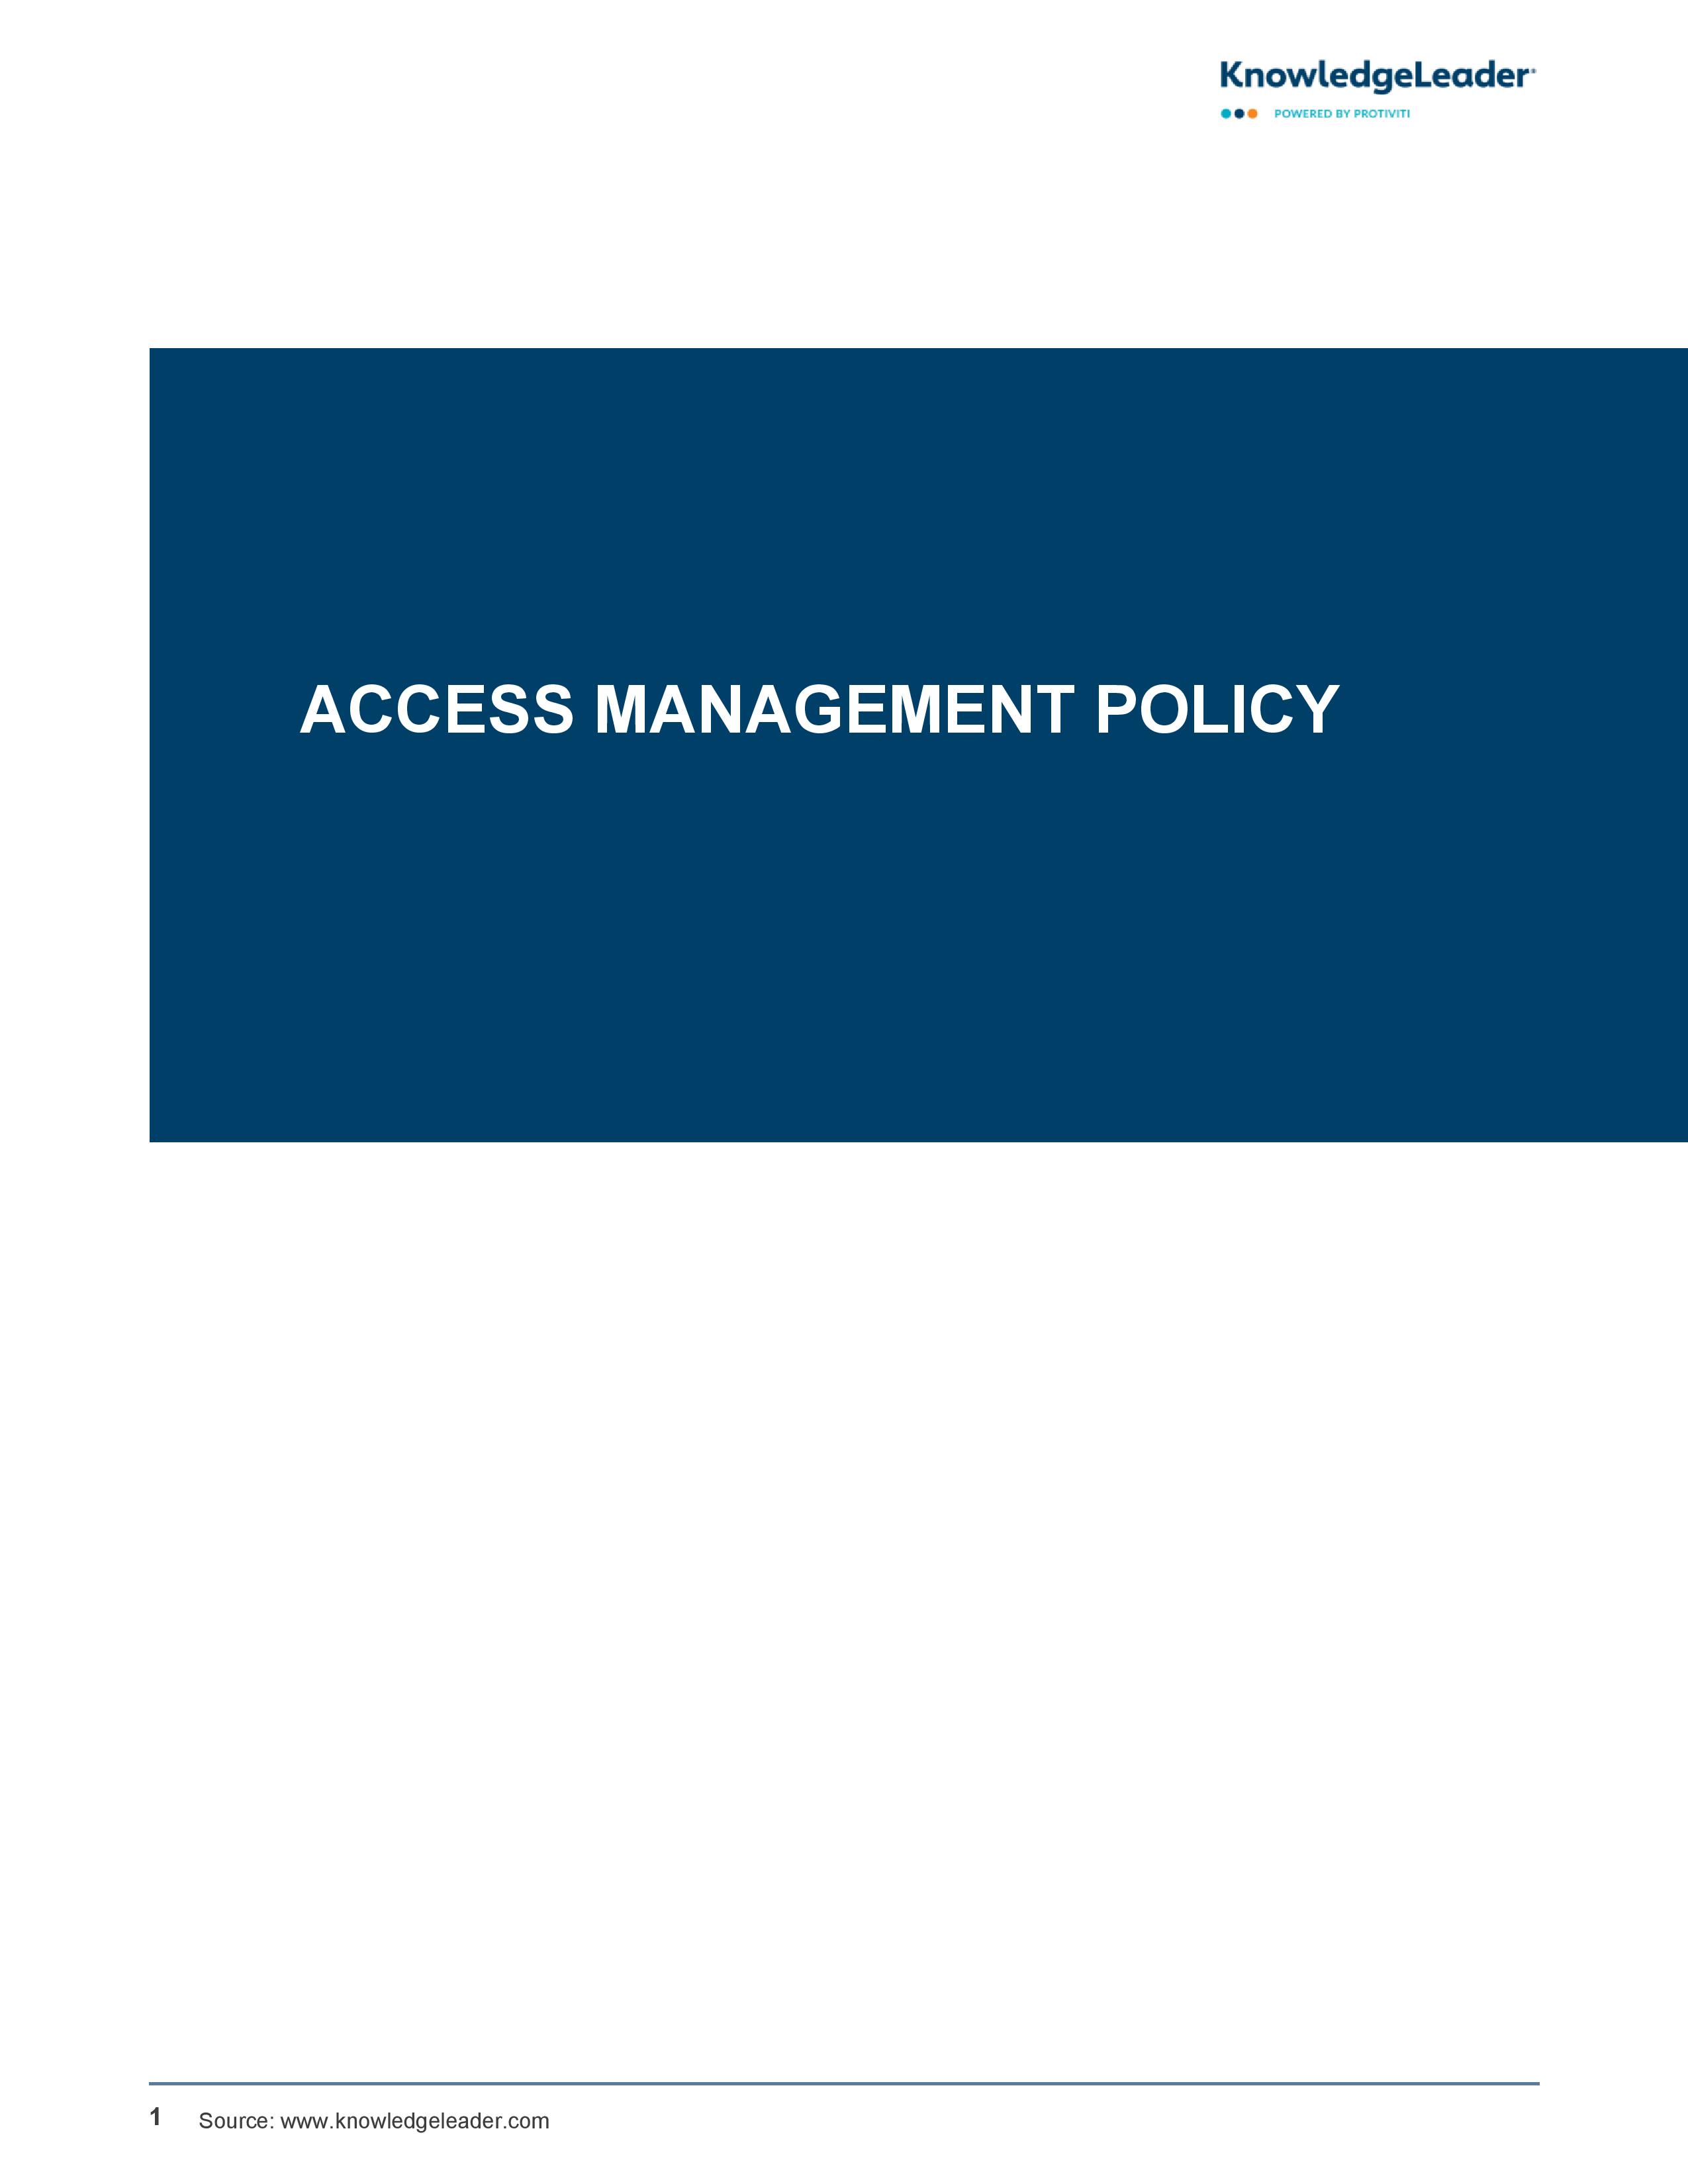 Screenshot of the first page of Access Management Policy